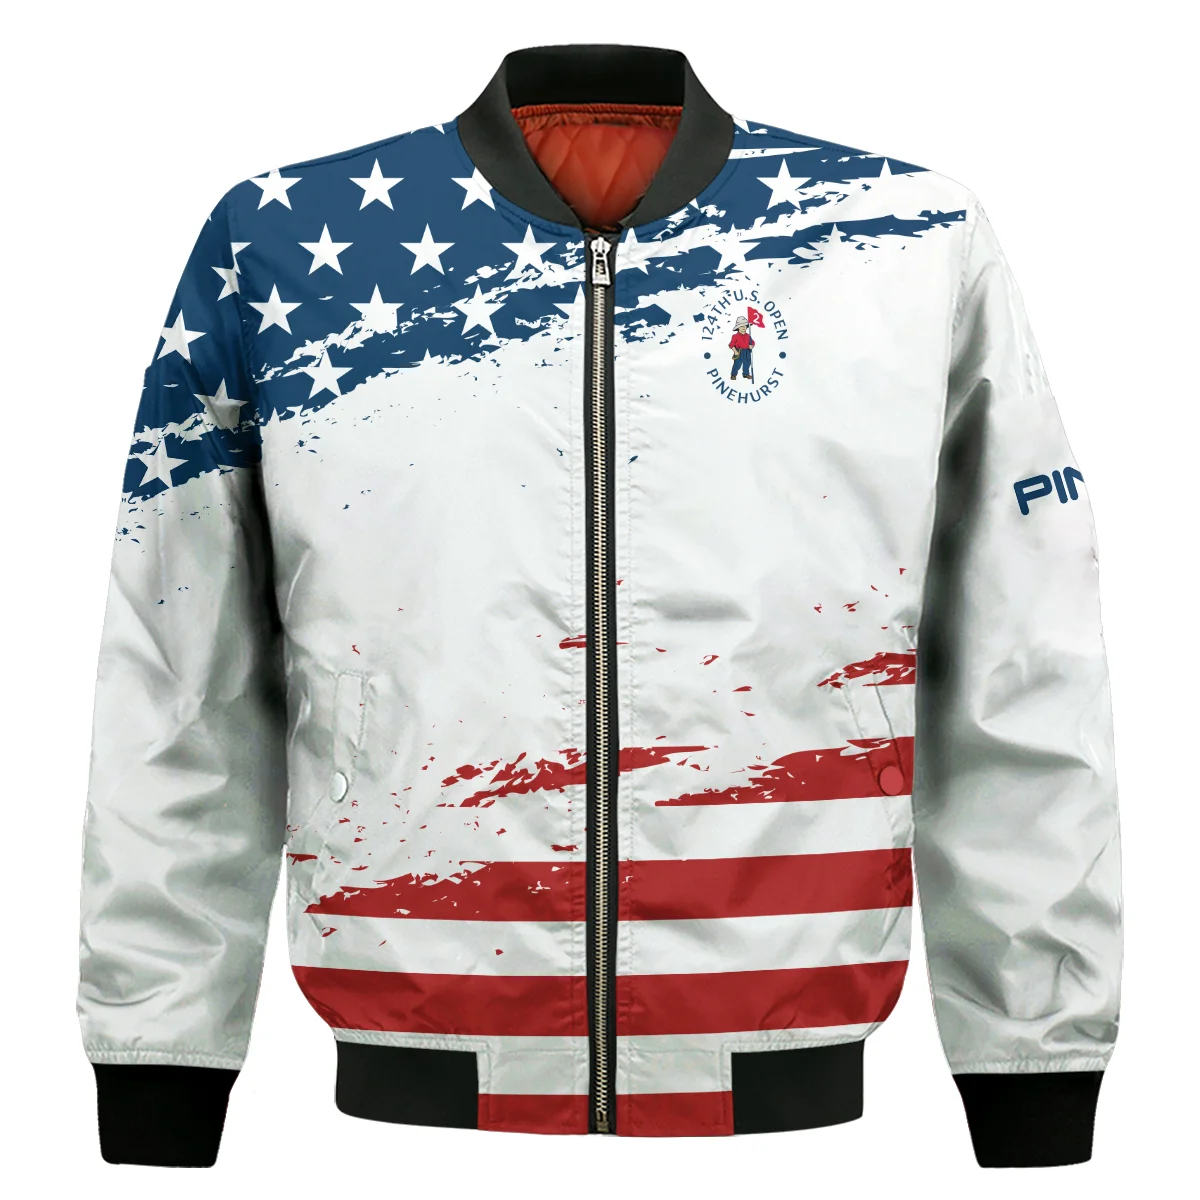 124th U.S. Open Pinehurst Special Version Ping Bomber Jacket Blue Red White Color Bomber Jacket